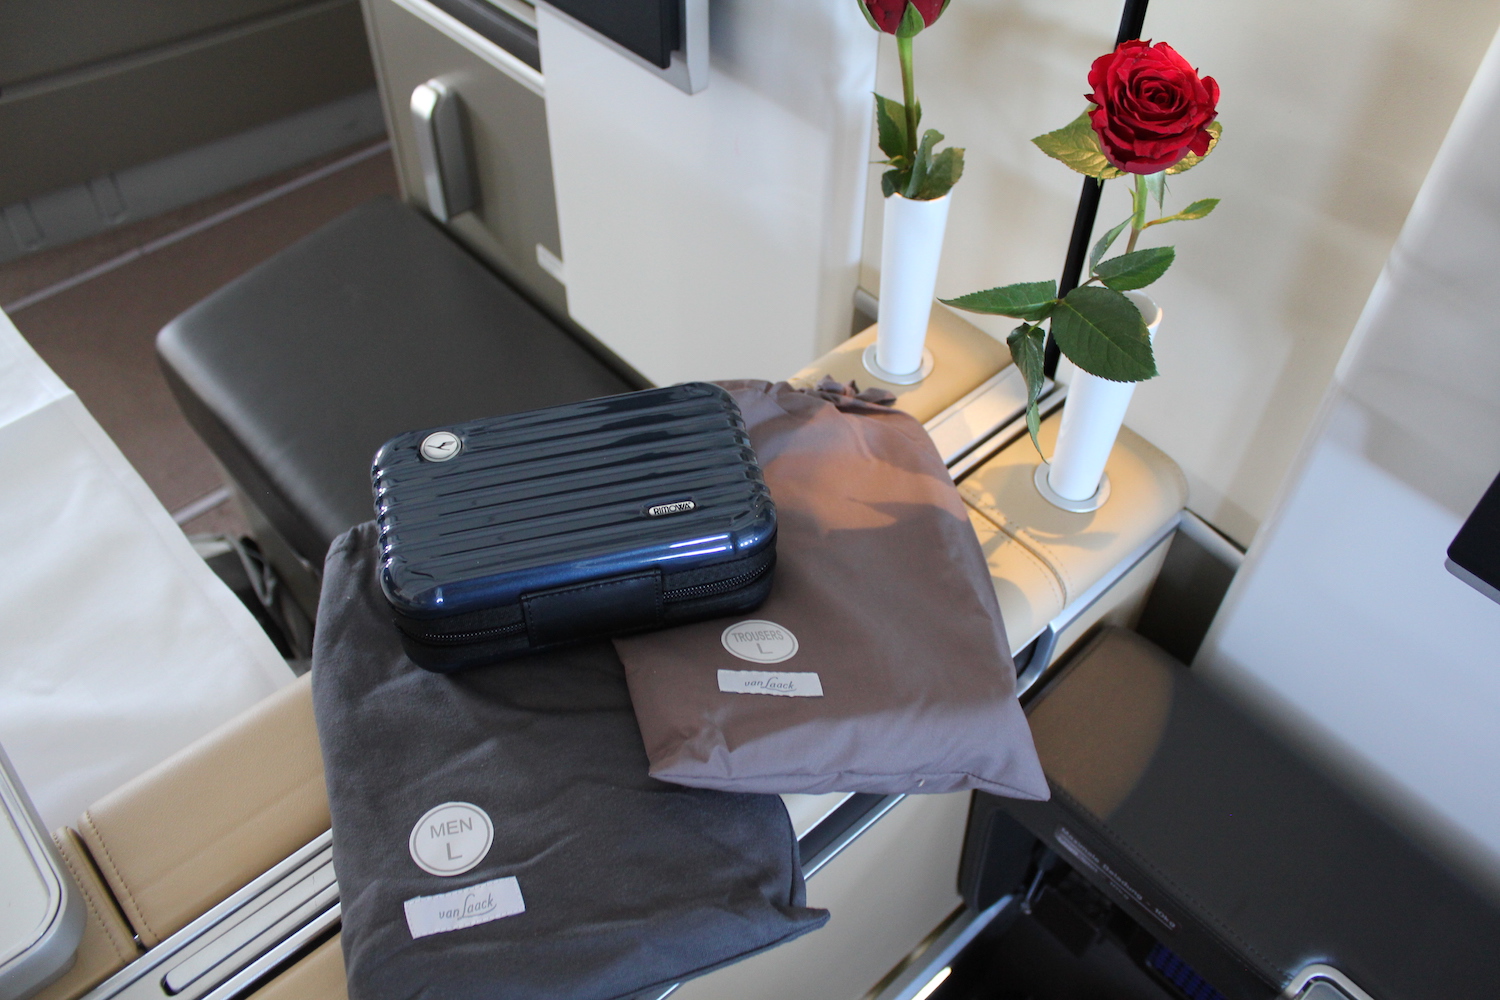 First Class: Lufthansa vs. SWISS - Live and Let's Fly